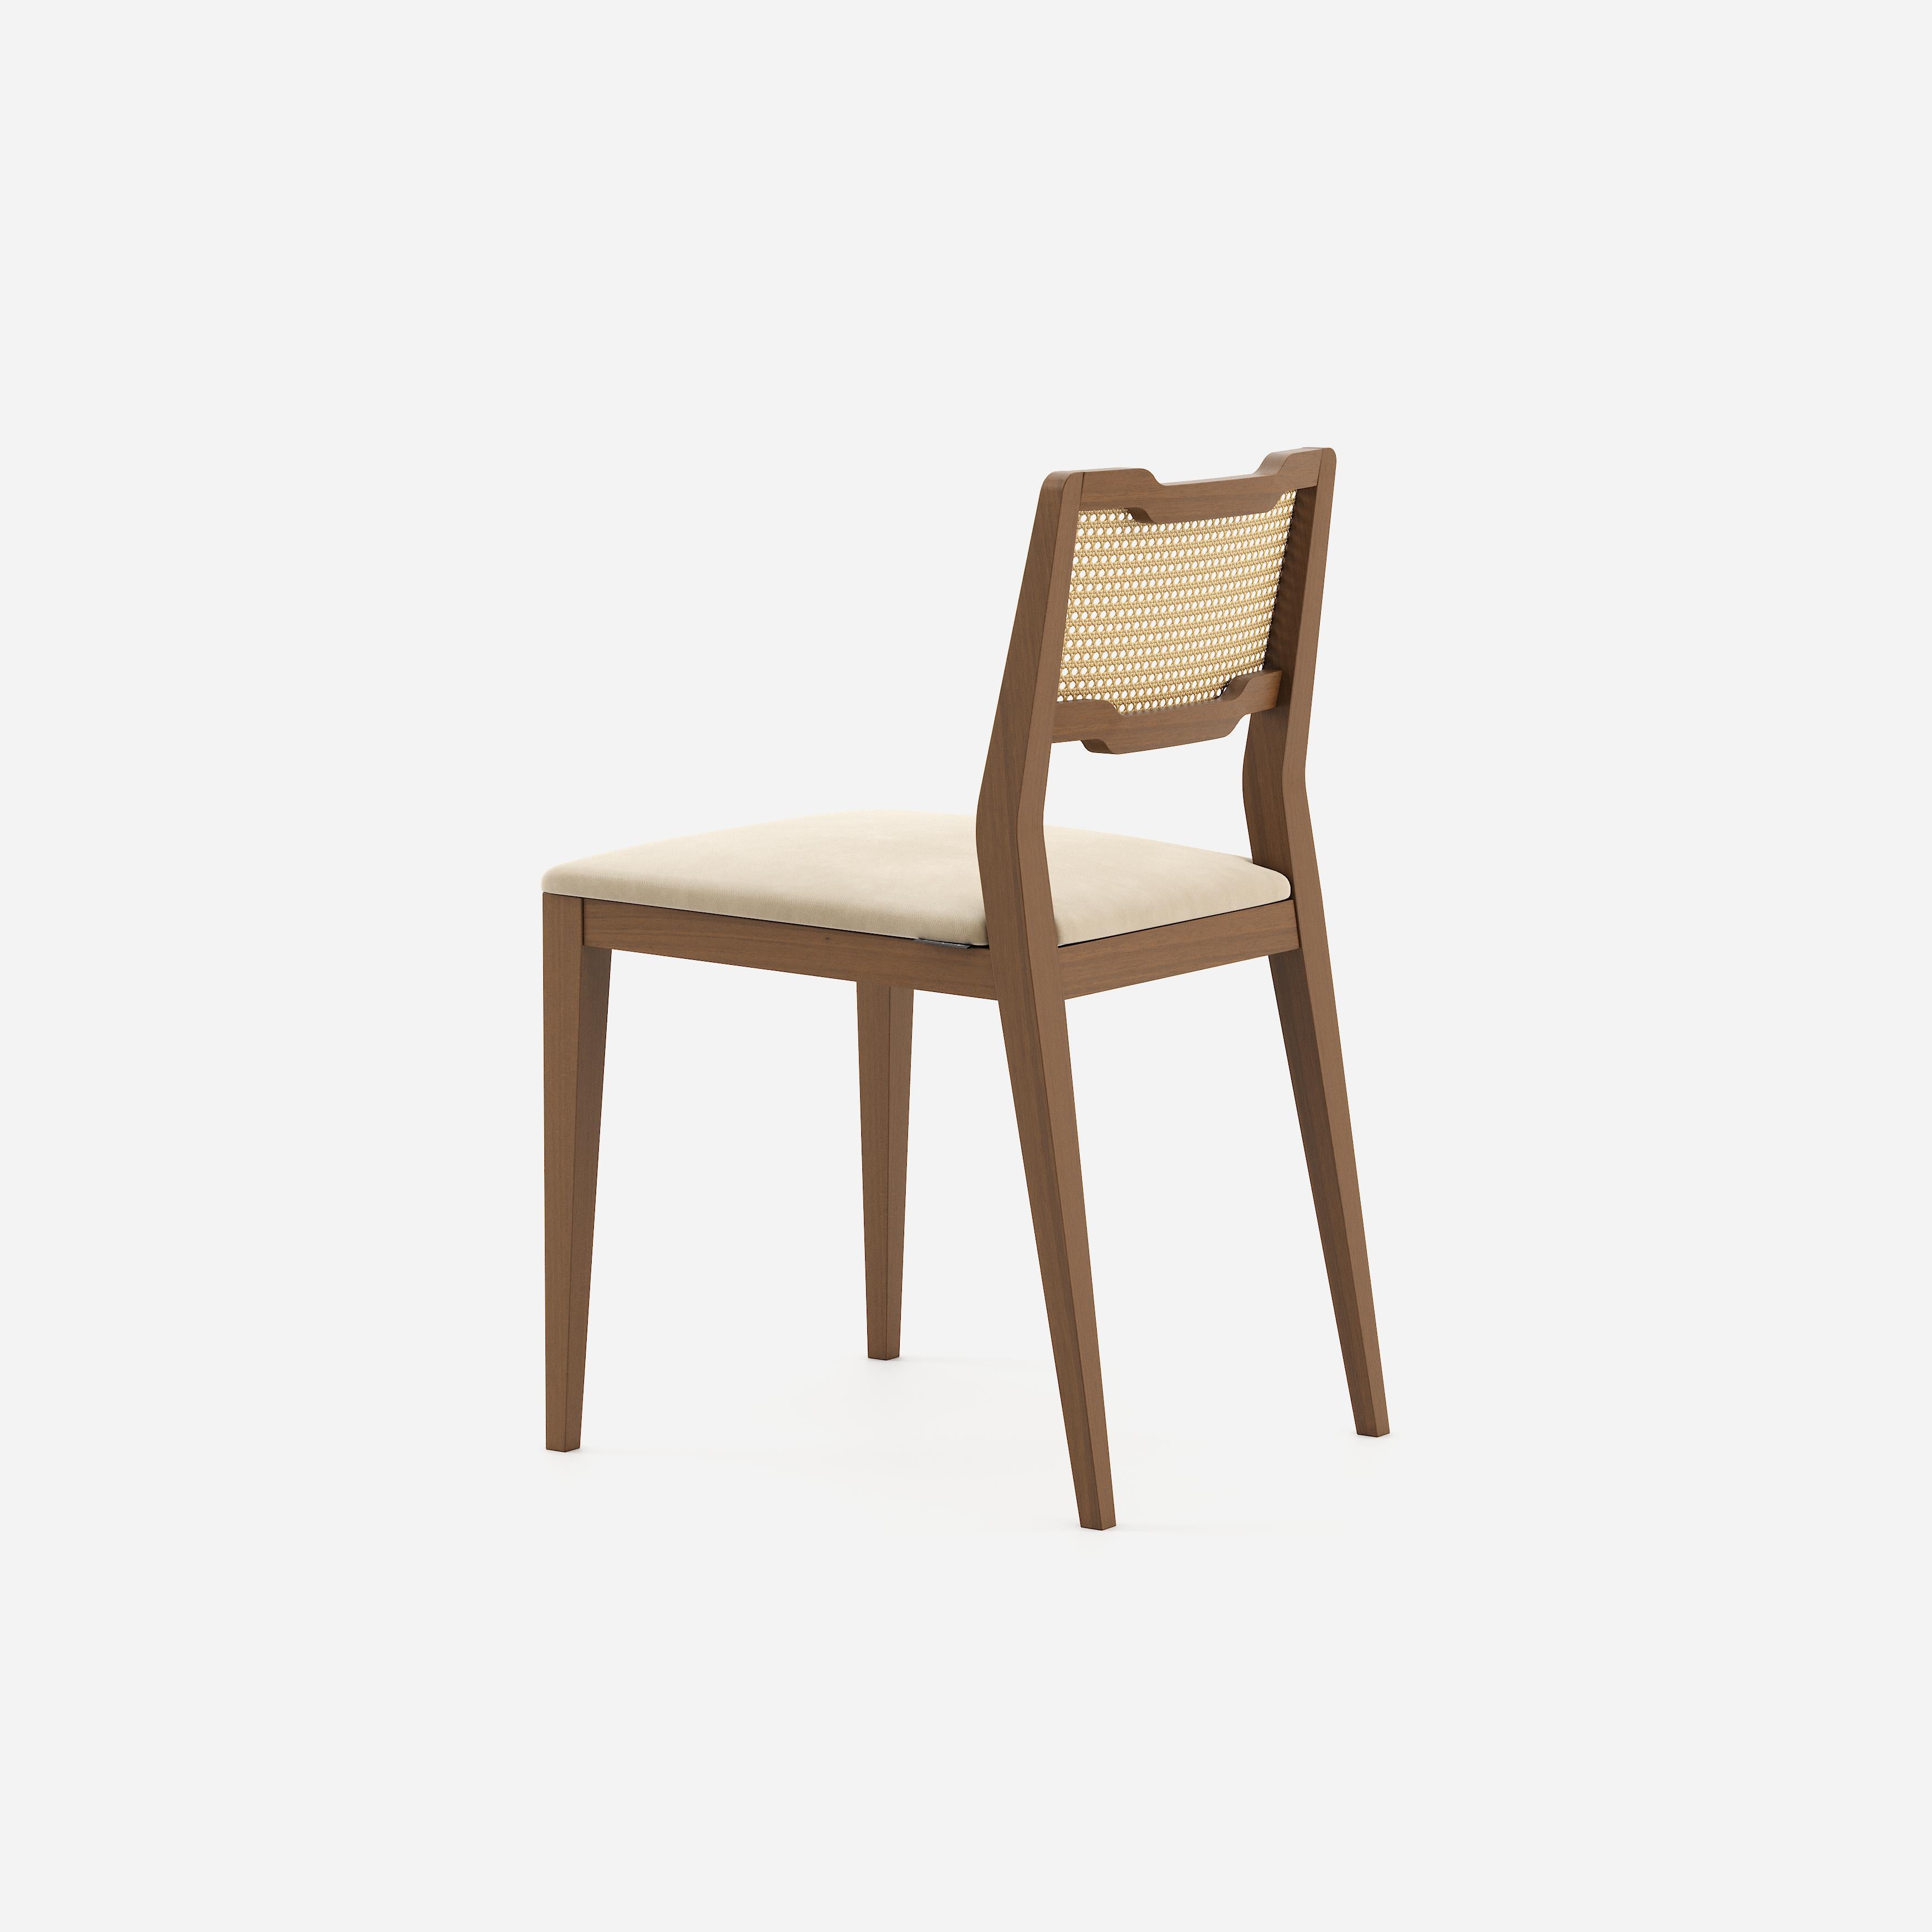 Portuguese Contemporary Rattan Dining Chairs in Walnut Finish, Set of 4.